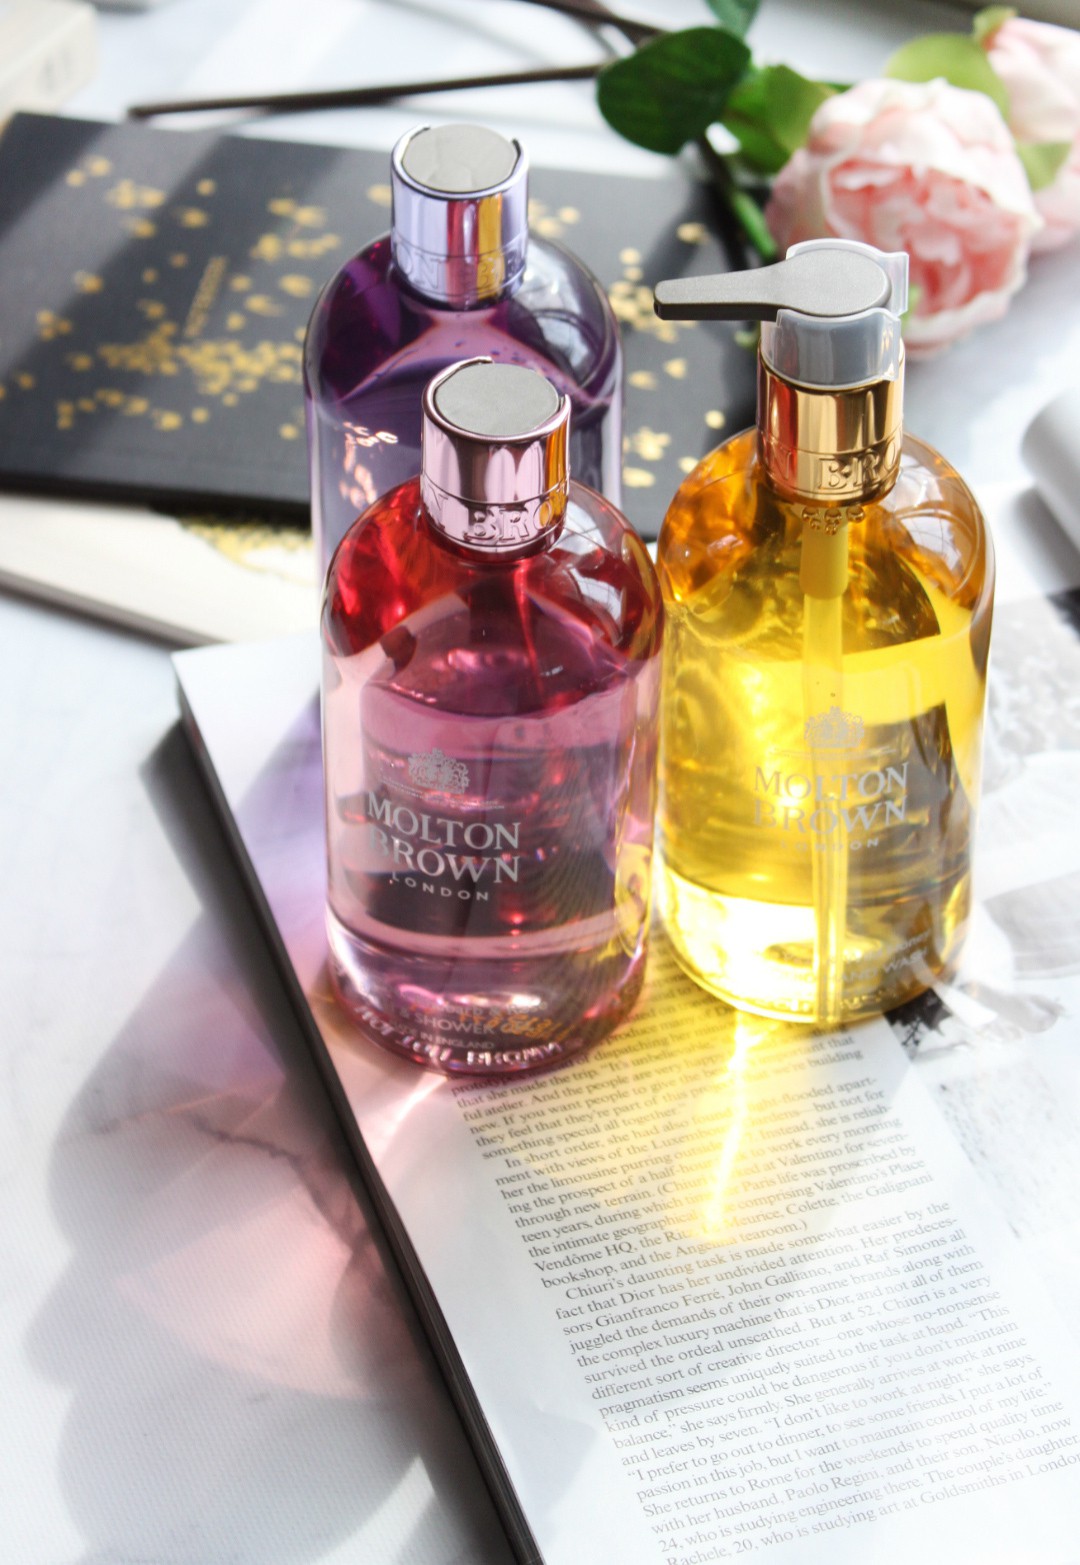 Molton Brown The Patisserie Parlour Collections: Delicious Rhubarb & Rose, Comice Pear & Wild Honey, and Exquisite Vanilla & Violet Flower